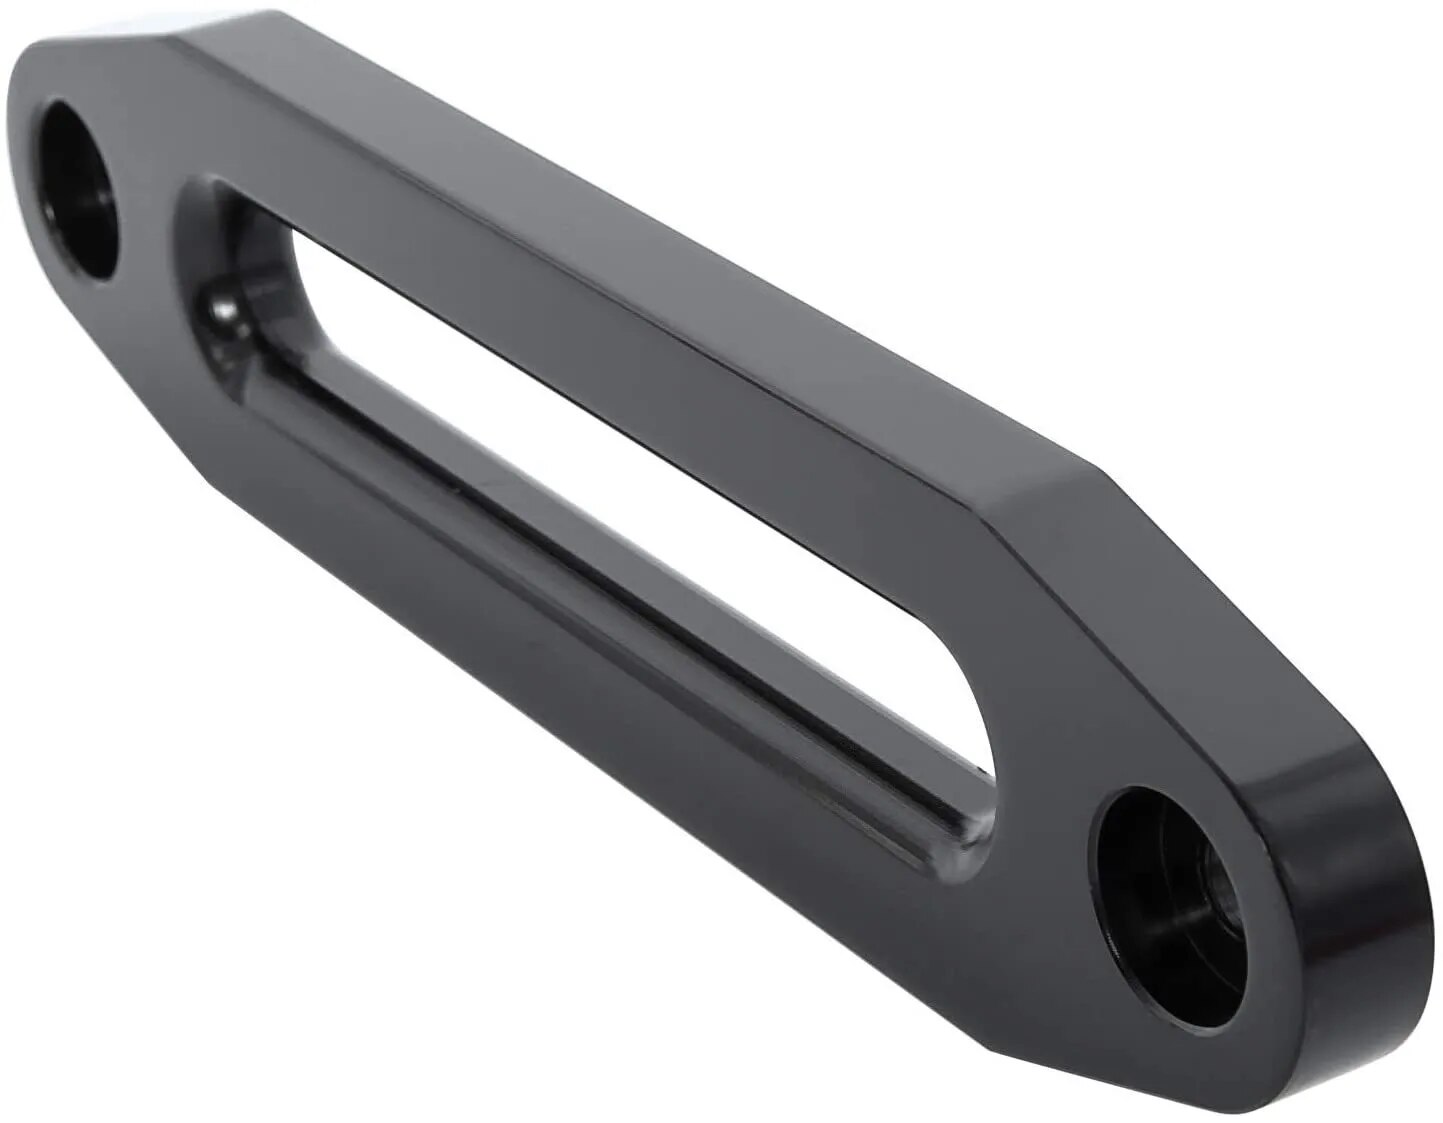 10-Inch Black Chrome Billet Aluminum Hawse Fairlead: Suitable for 8000-15000 LBs Synthetic Winch Rope on SUVs, ATVs, and UTVs